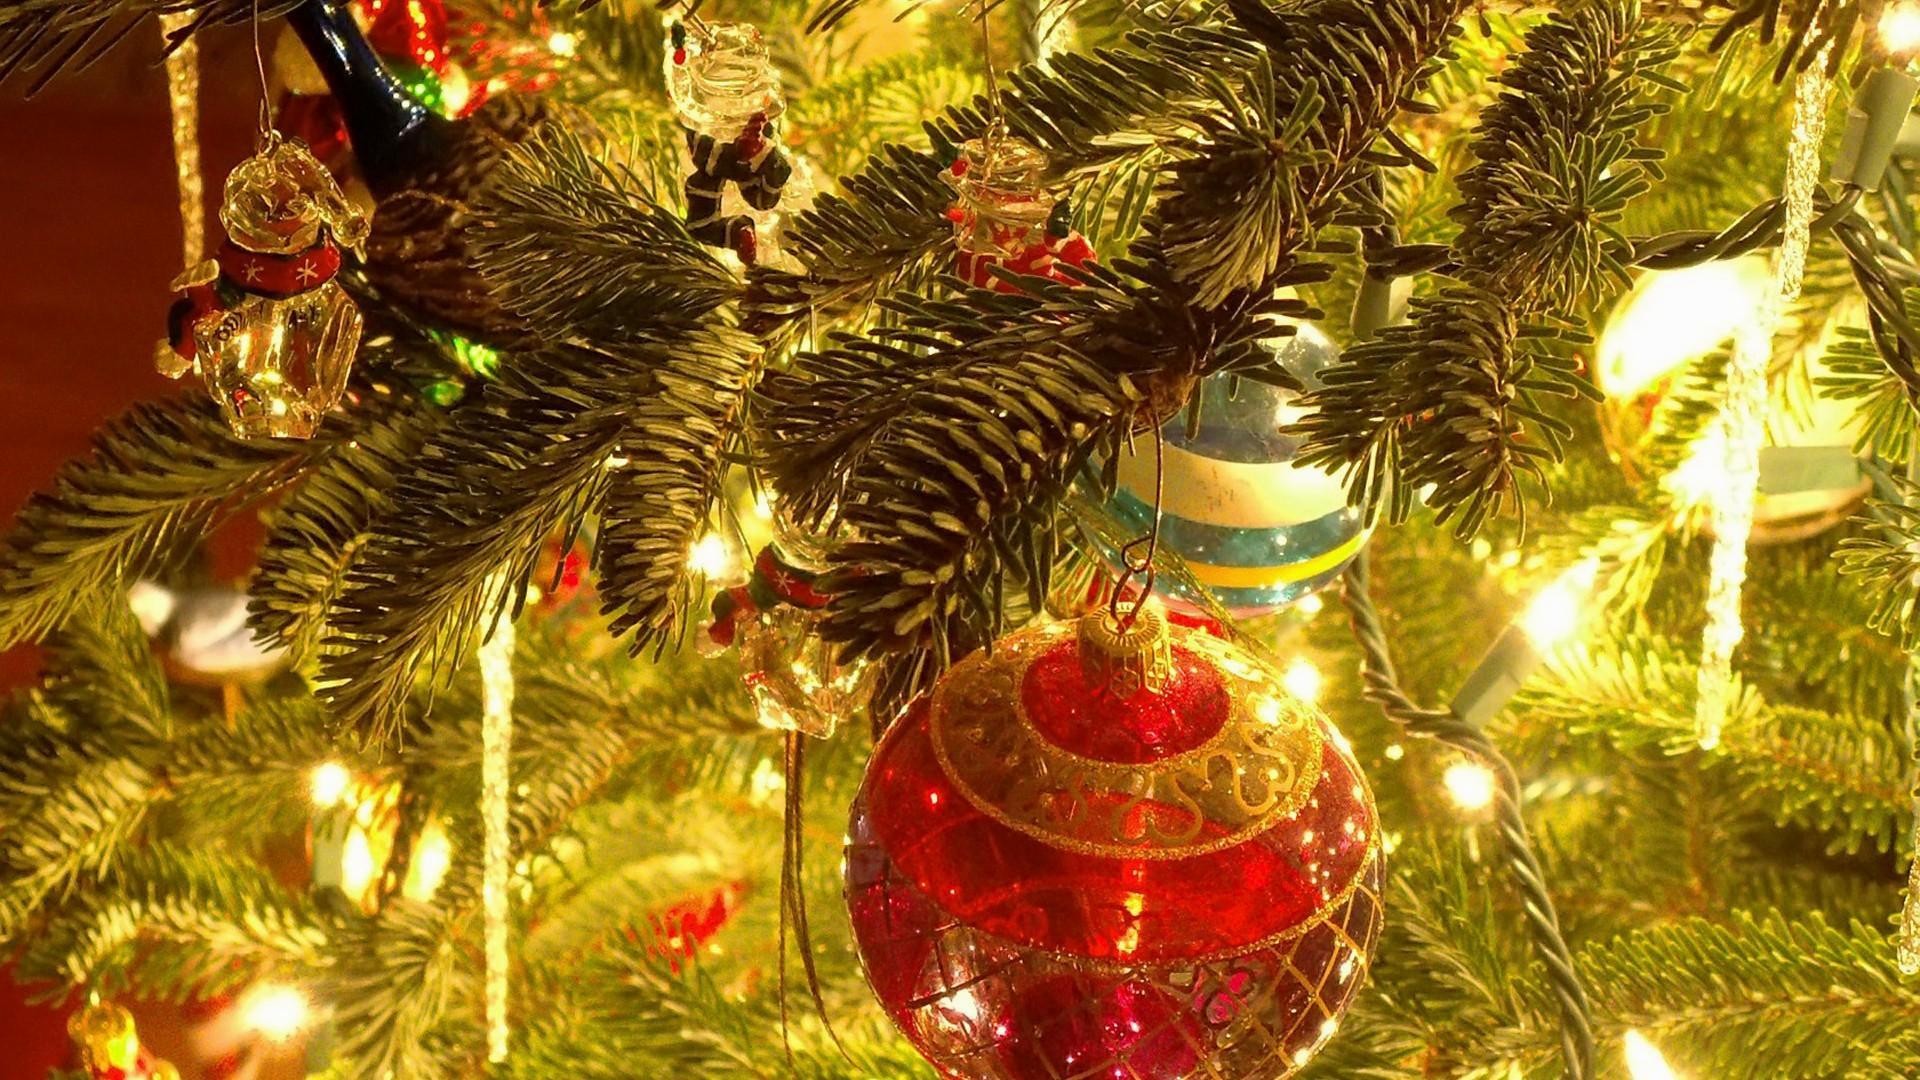 1920x1080 Download Christmas Eve Live Wallpaper Apps For Windows Phones